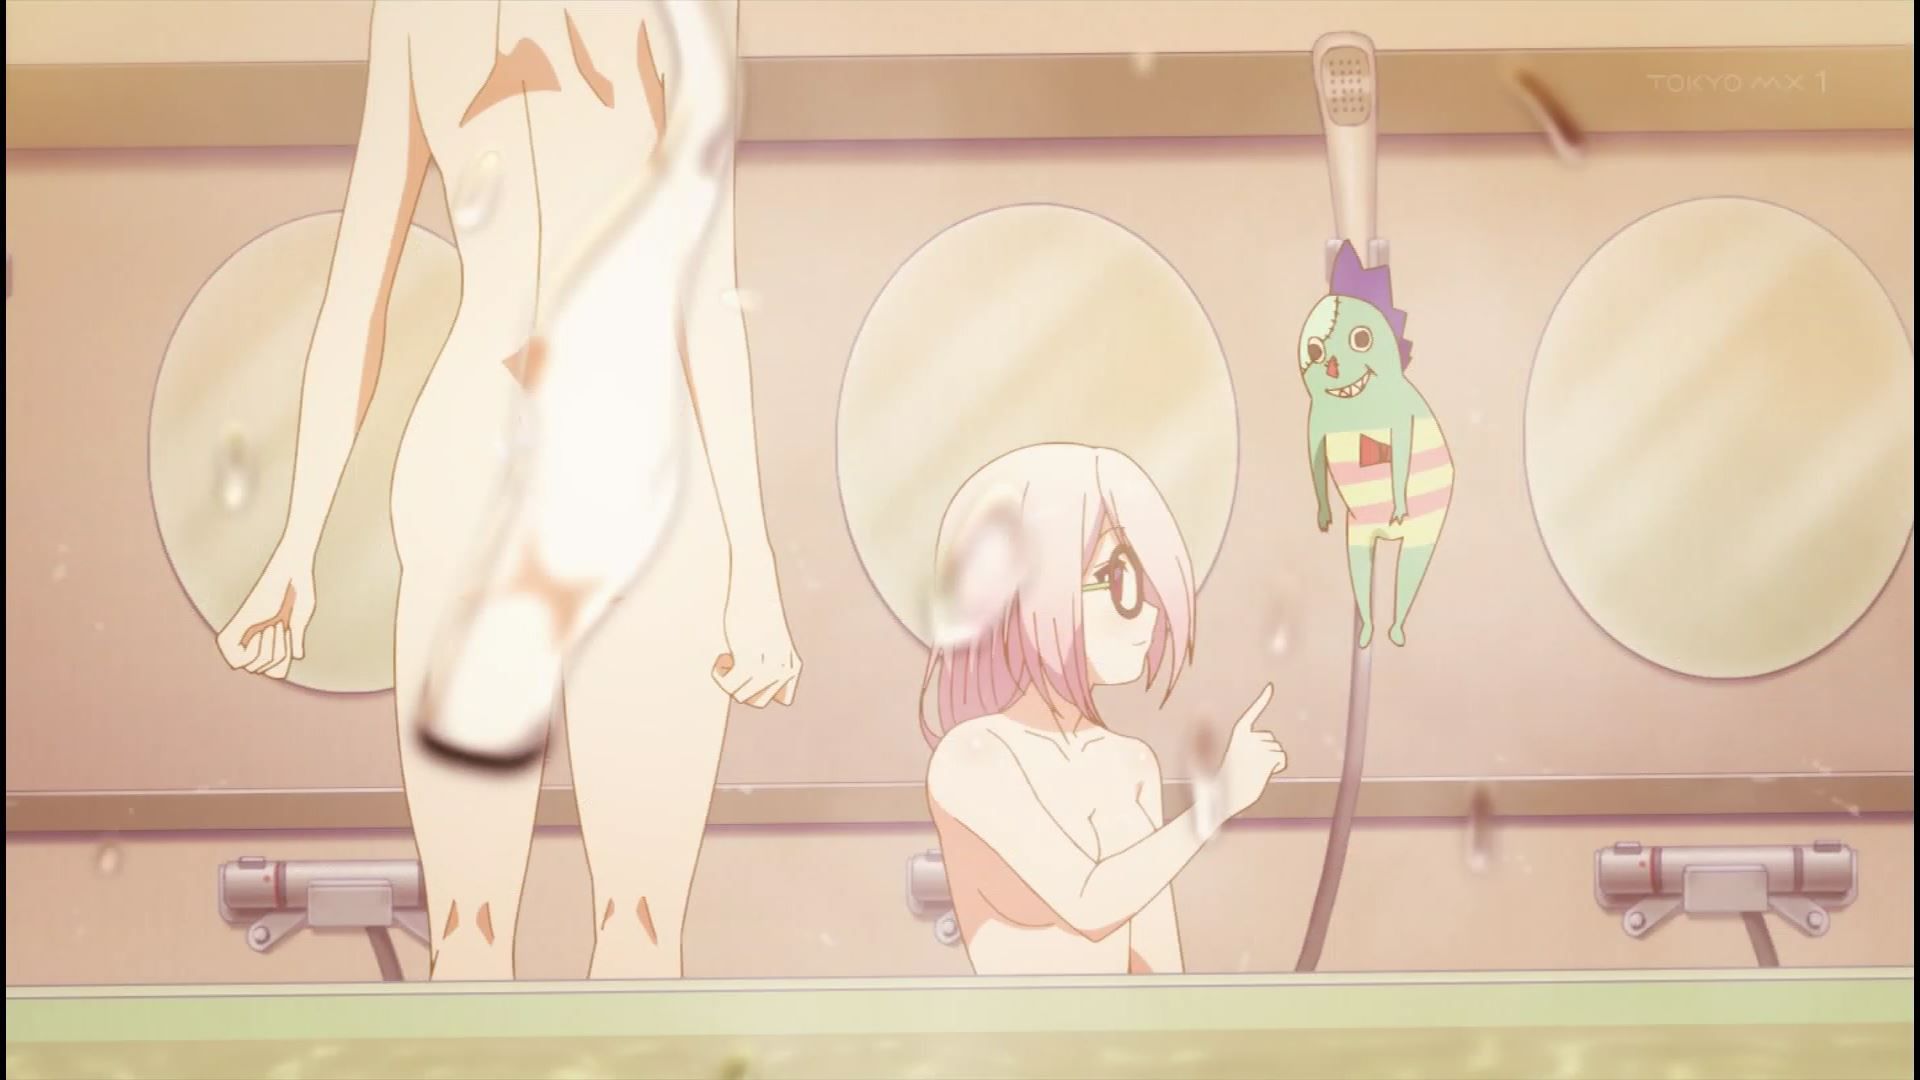 Erotic breasts and naked figure in erotic bathing scene of girls in the anime [Music girl] 2 story! 7